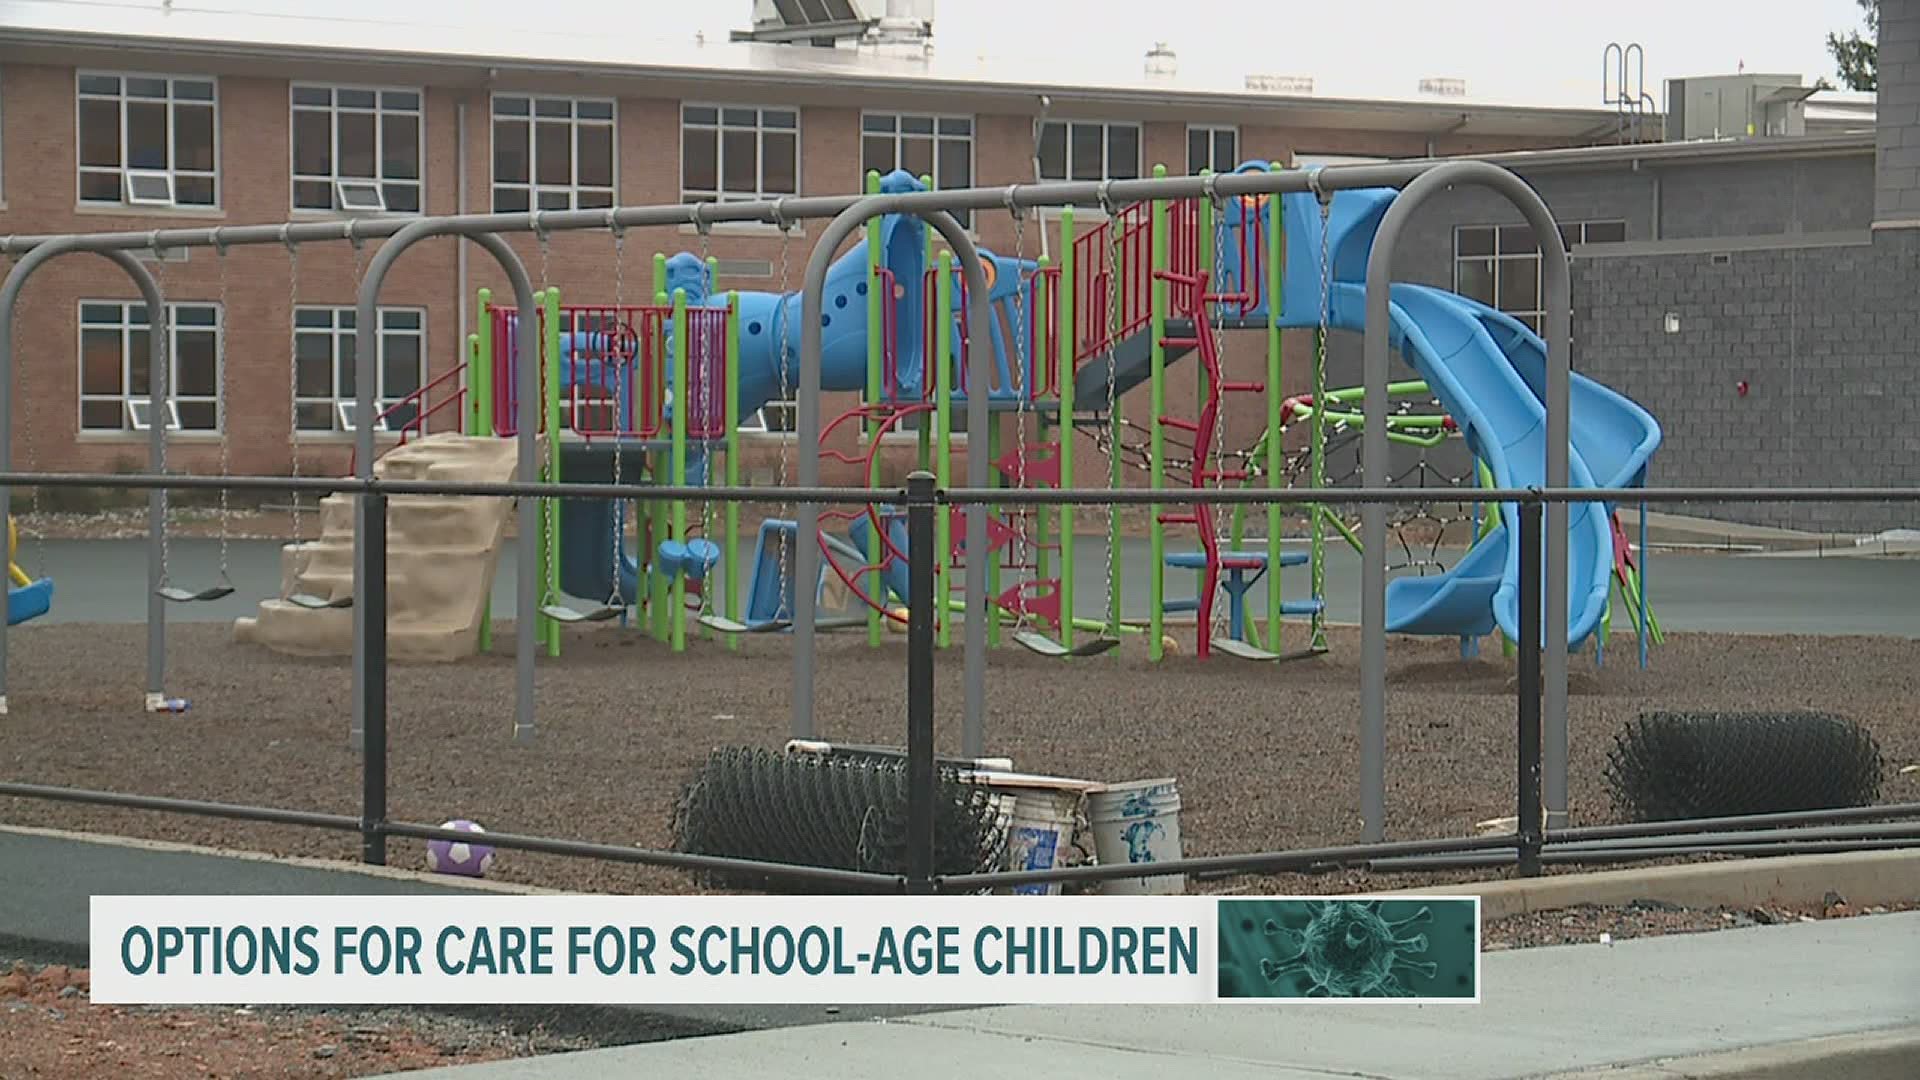 Day care options for parents as schools open up.